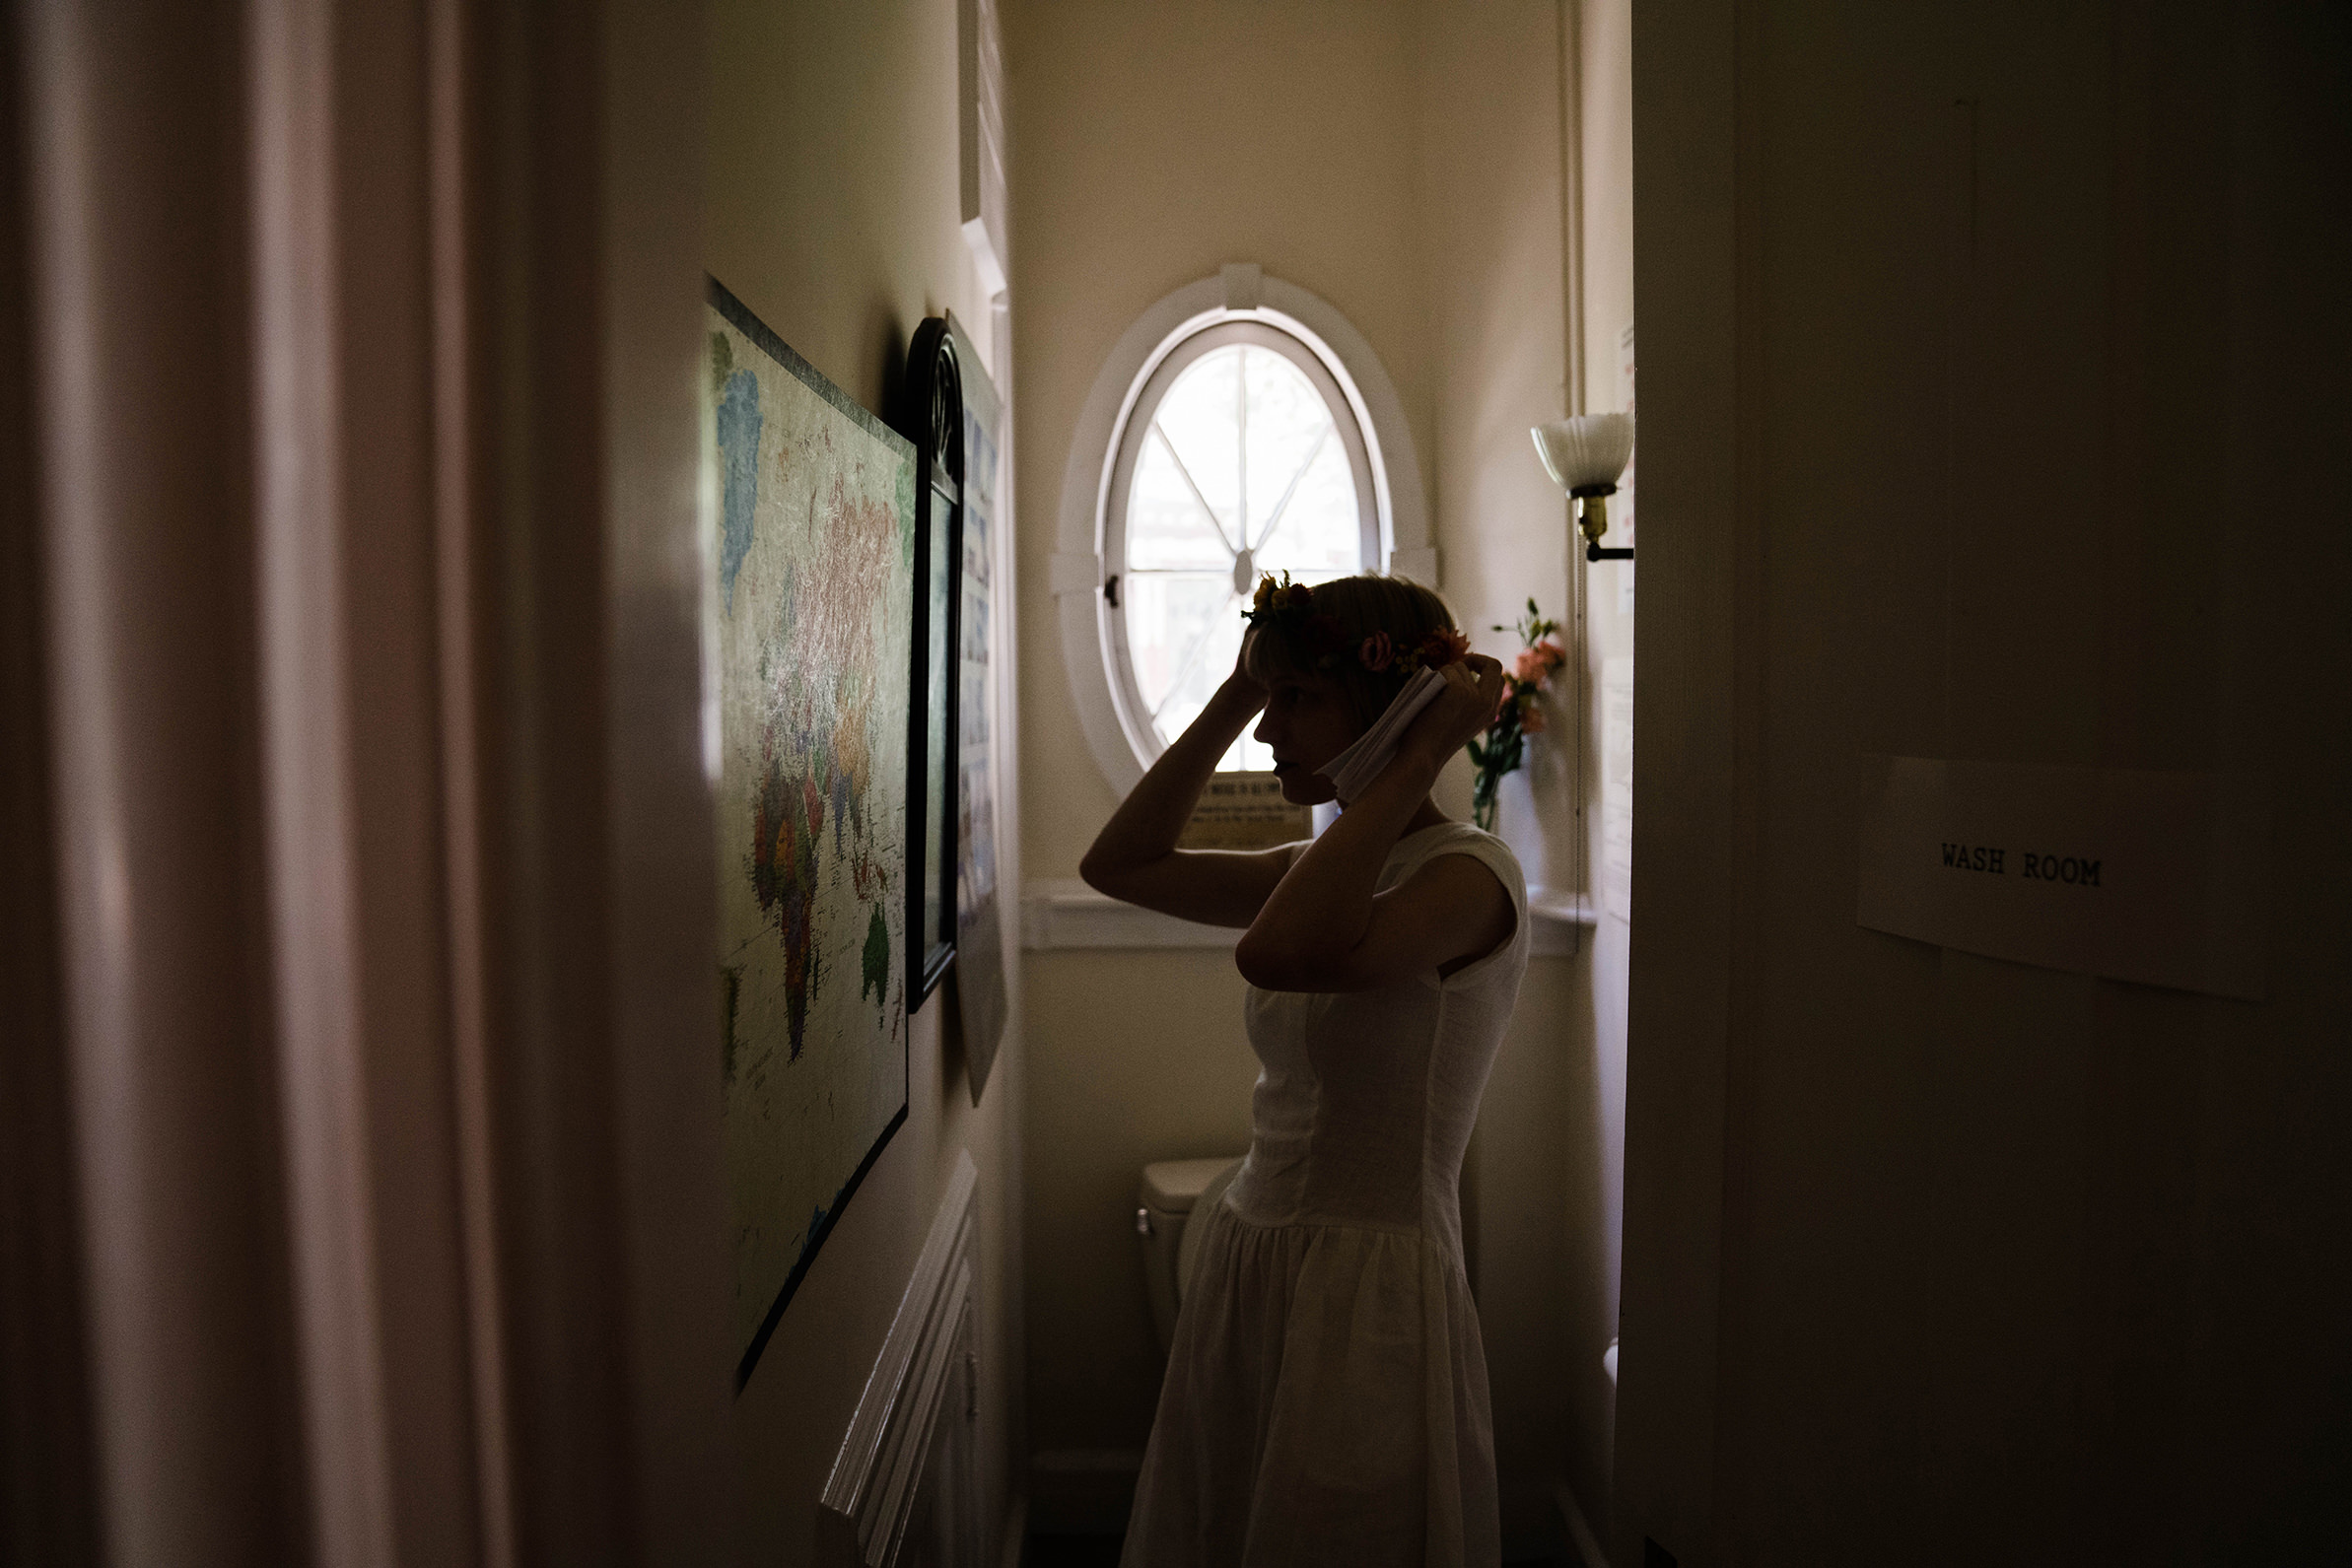 A documentary photograph featured in the best of wedding photography of 2019 showing a bride getting ready for her wedding